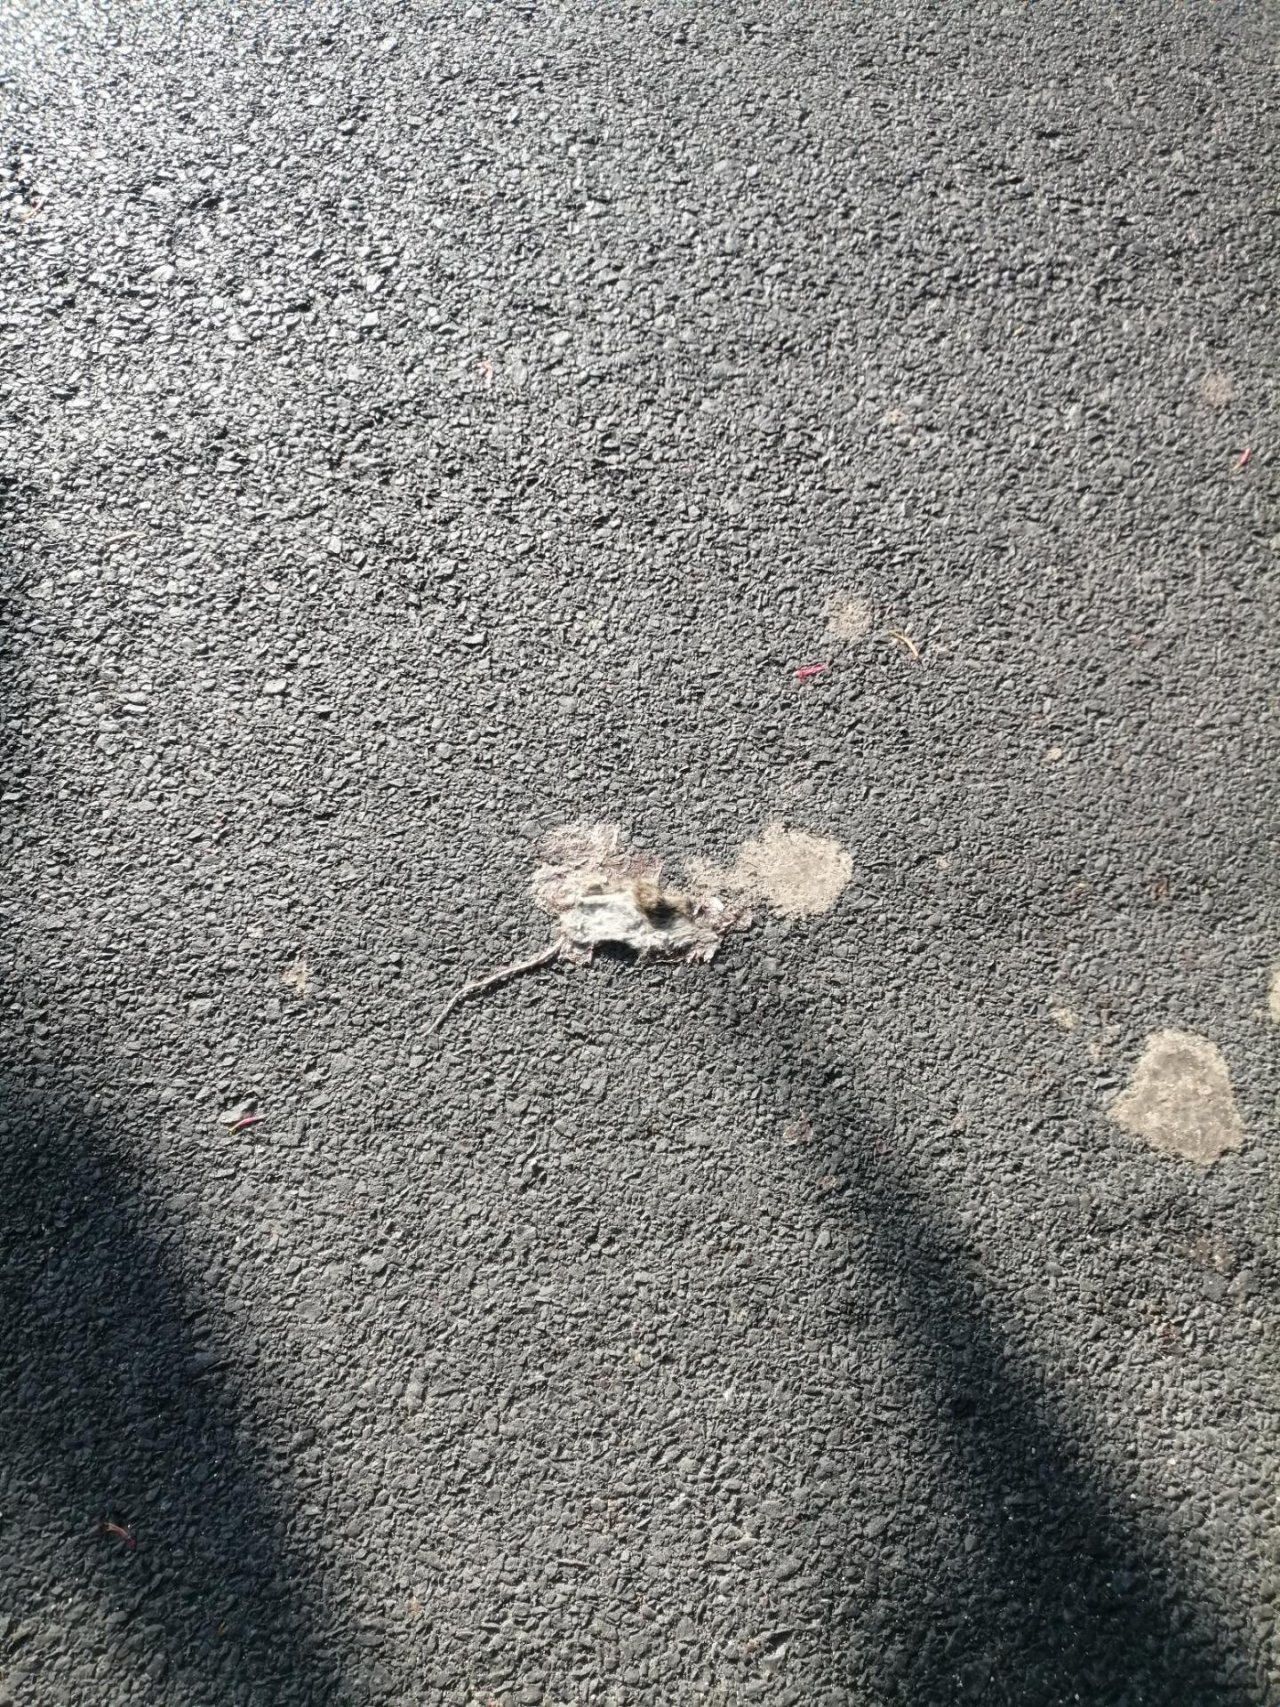 Reptil in Roadkill App spotted by Nilesh Shah on 27.01.2021